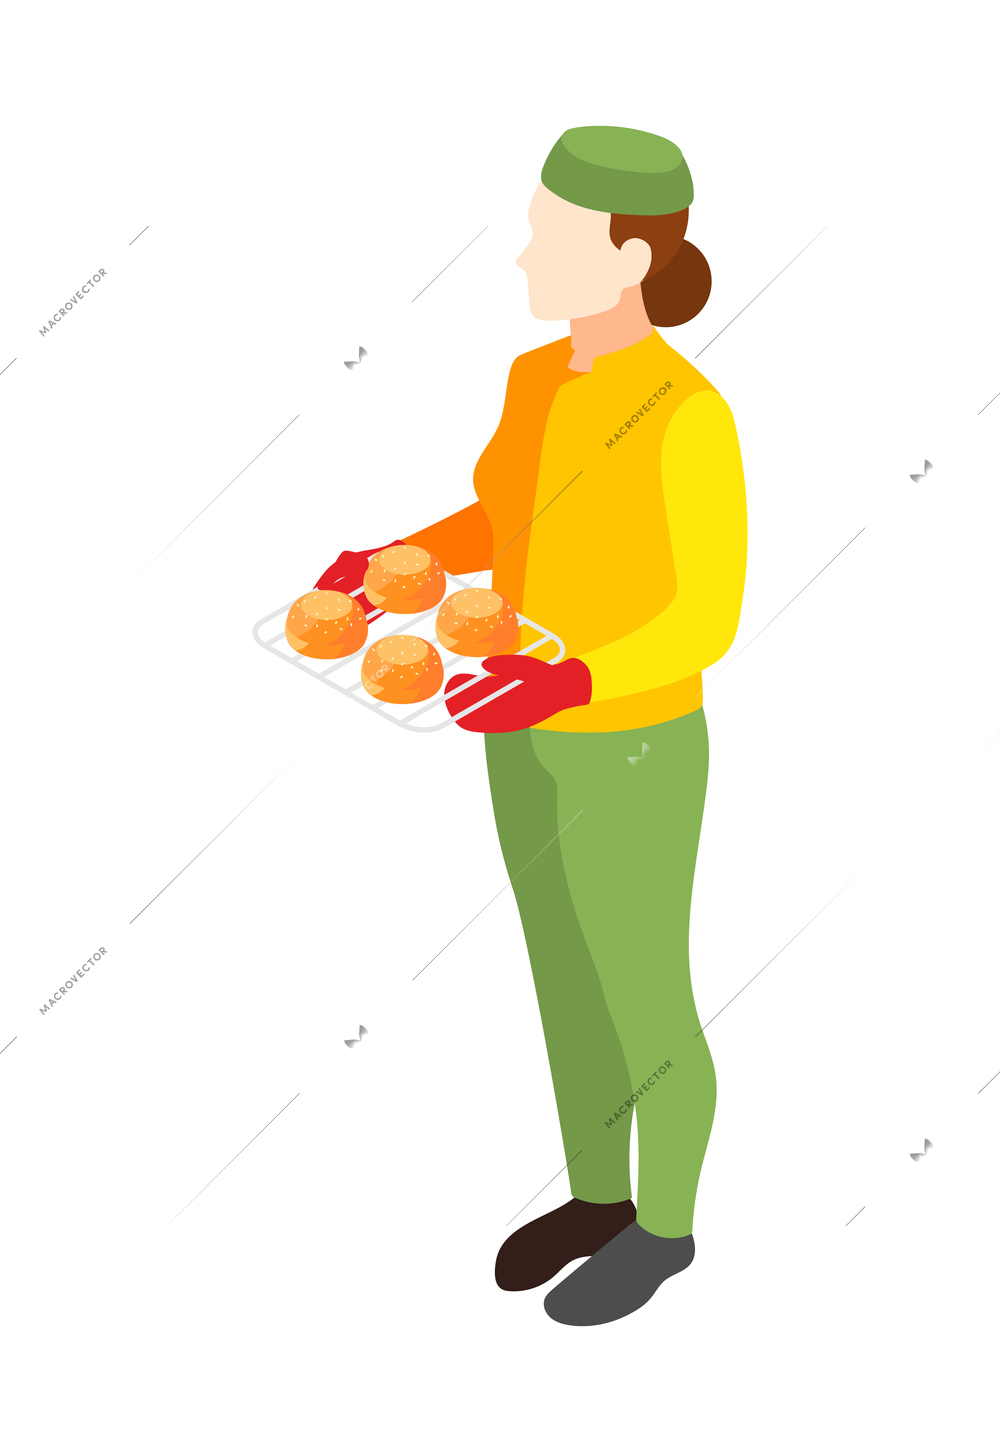 Burger house isometric with waiter character and food vector illustration